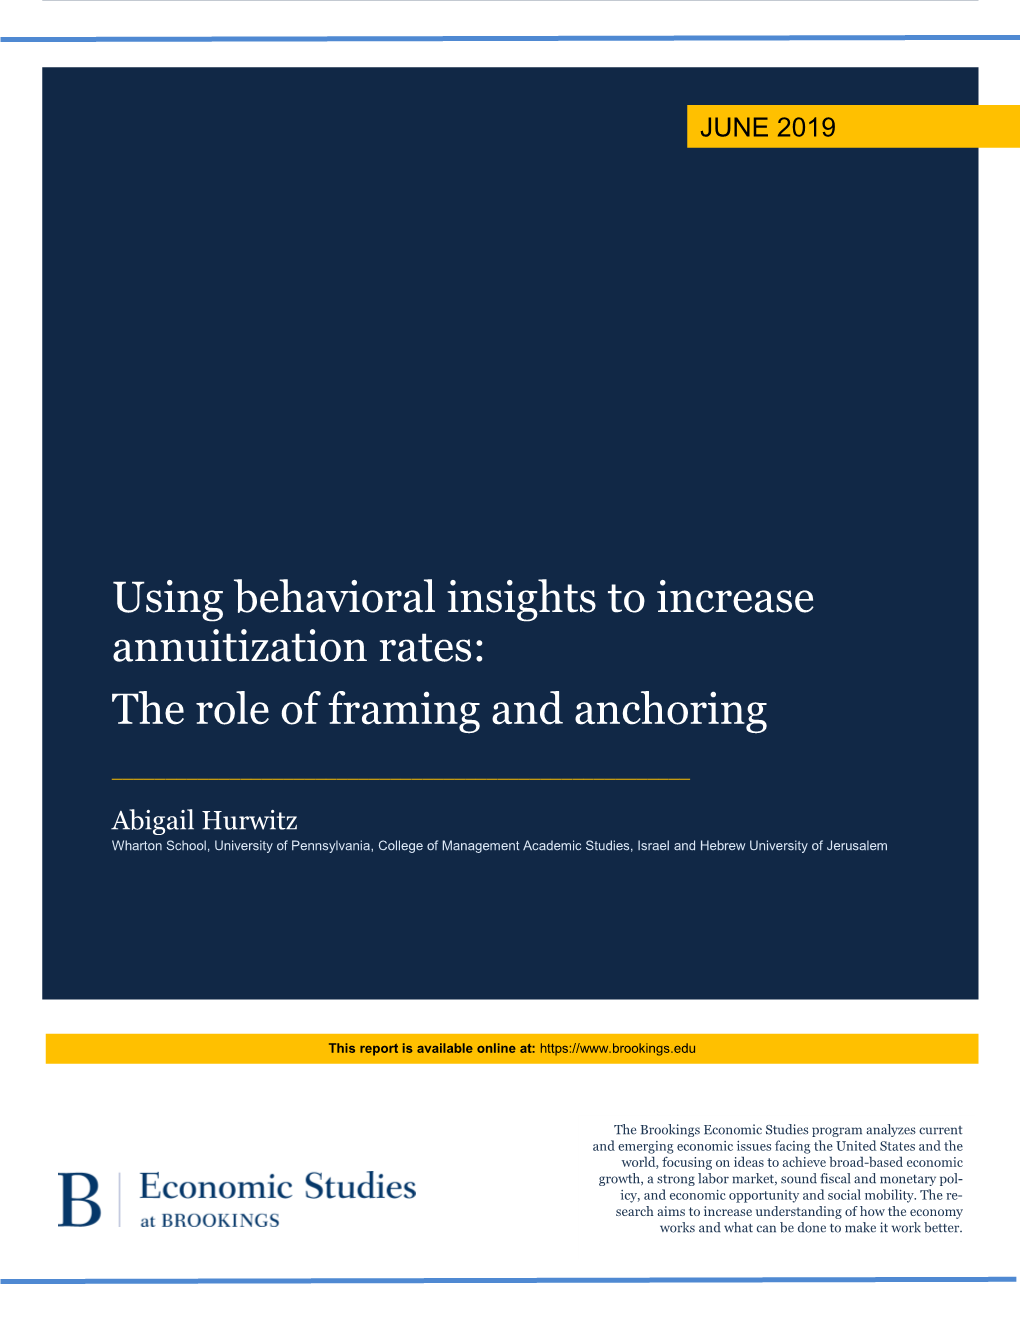 Using Behavioral Insights to Increase Annuitization Rates: the Role of Framing and Anchoring